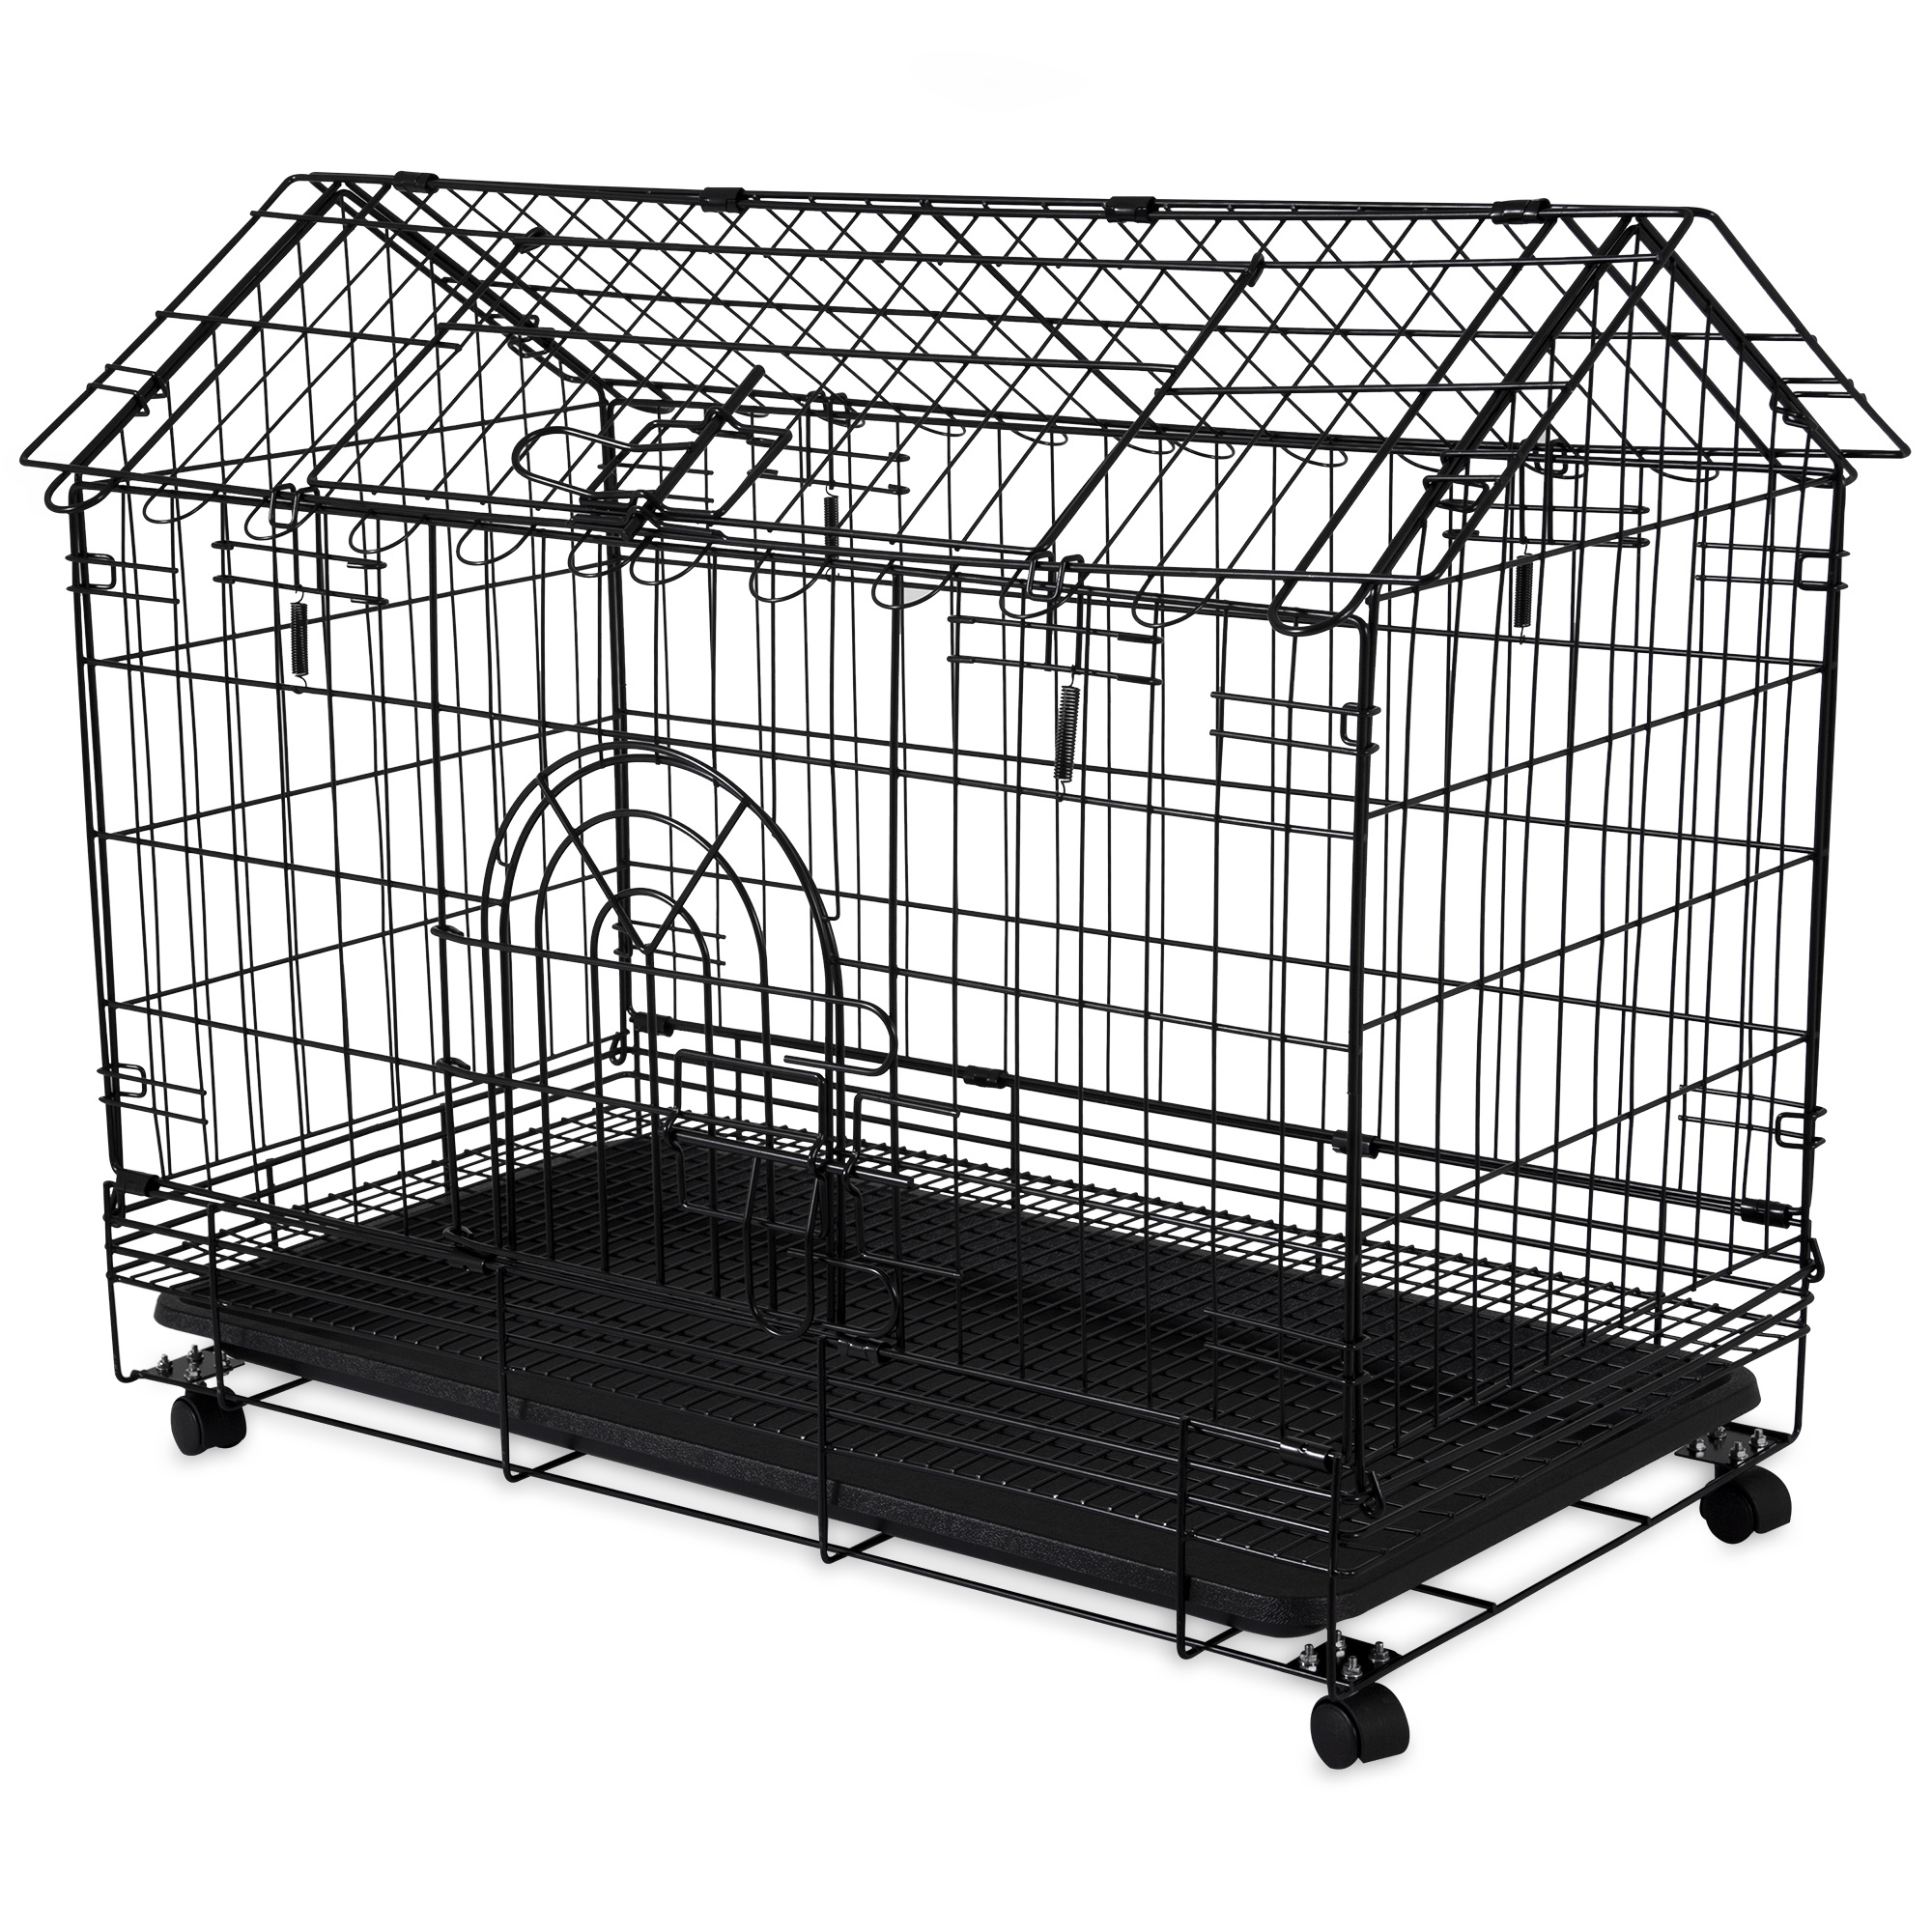 Kennel-Aire A Frame Bunny House, 30 in Length - image 1 of 2